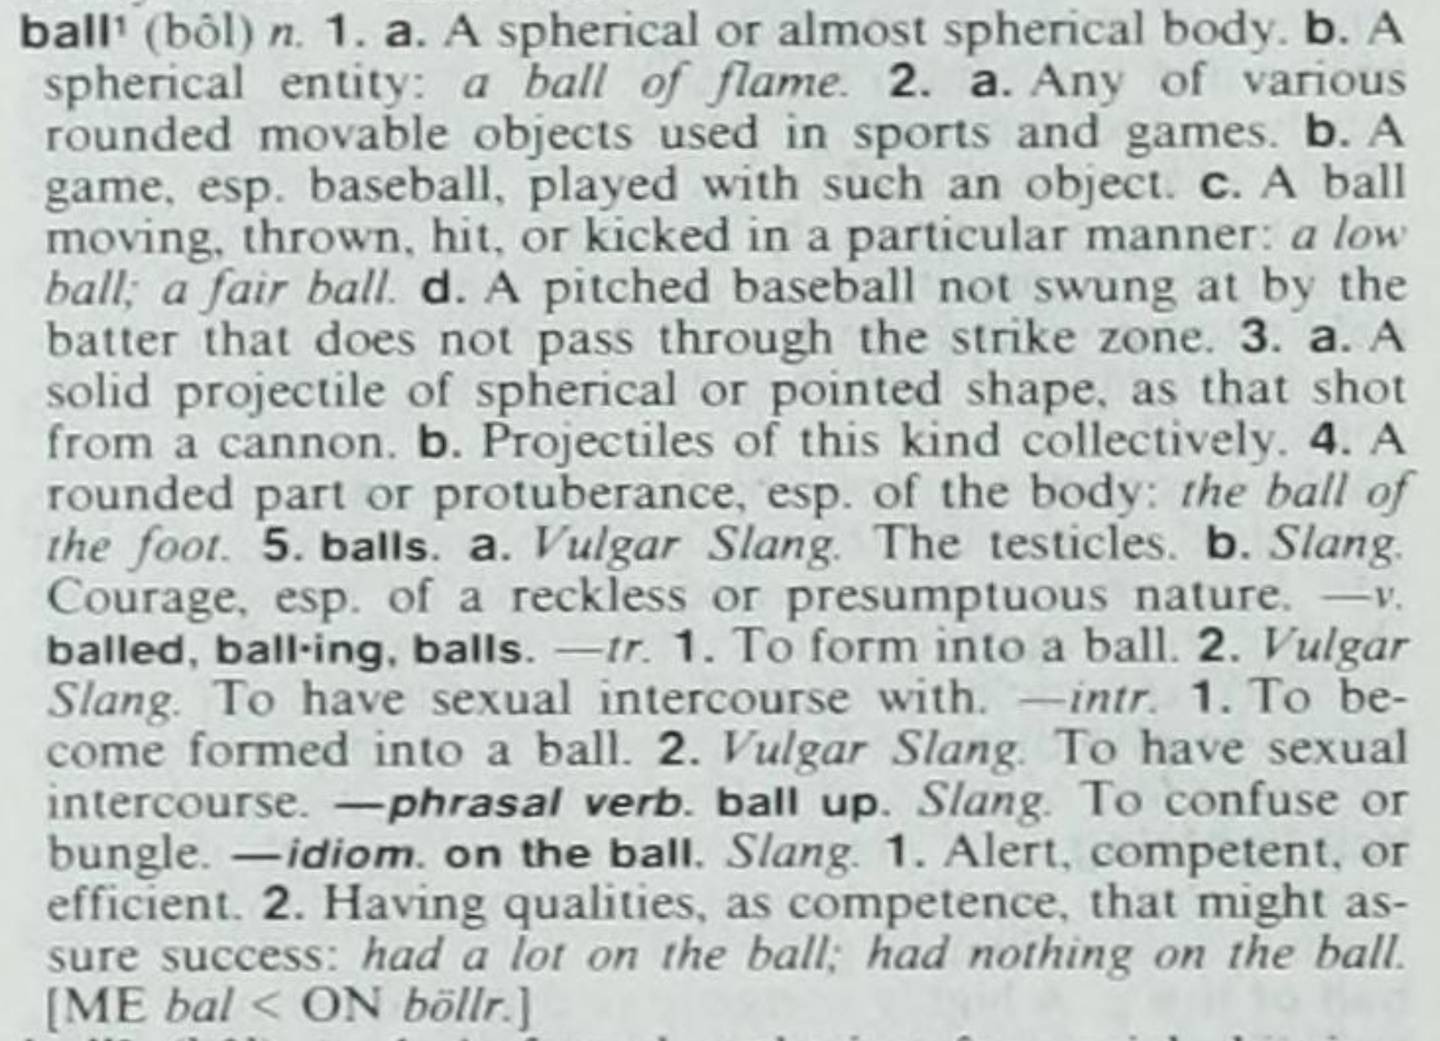 An American Heritage Dictionary excerpt for ball with a couple of "vulgar slang" meanings noted